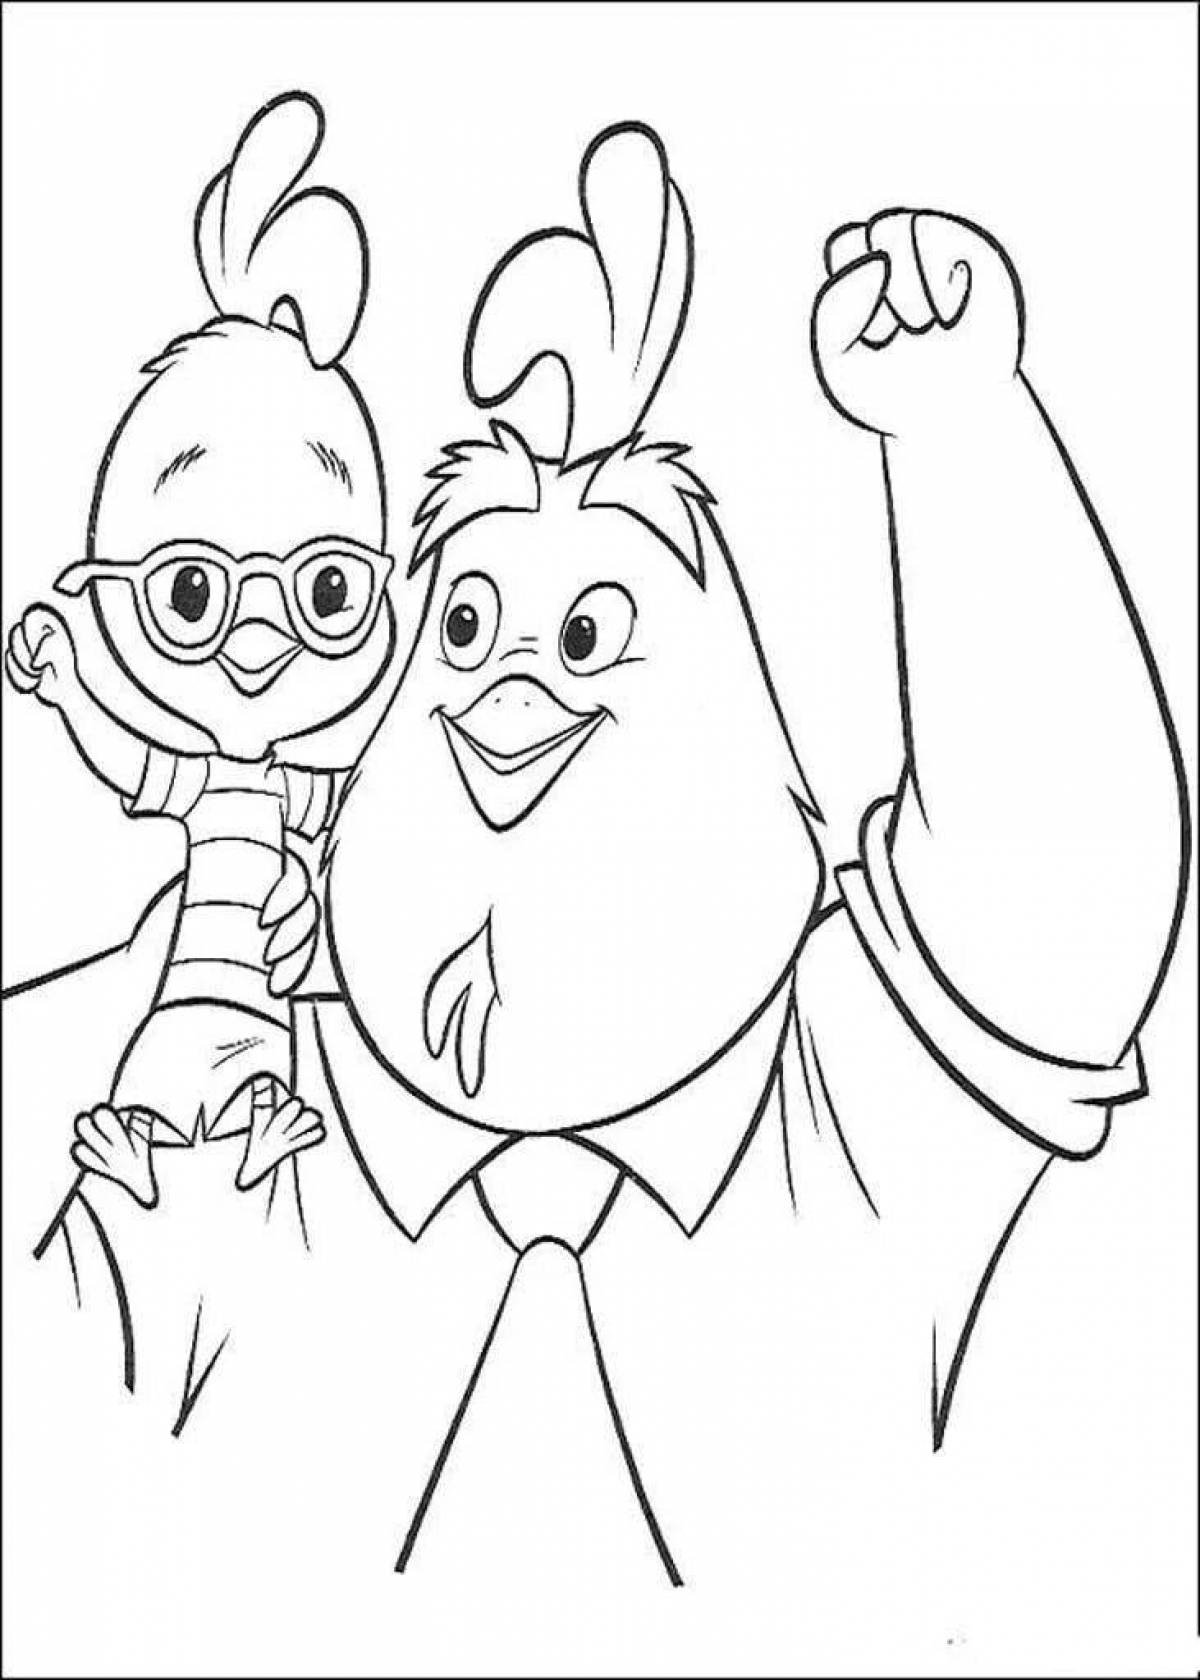 Colorful chicken coloring page